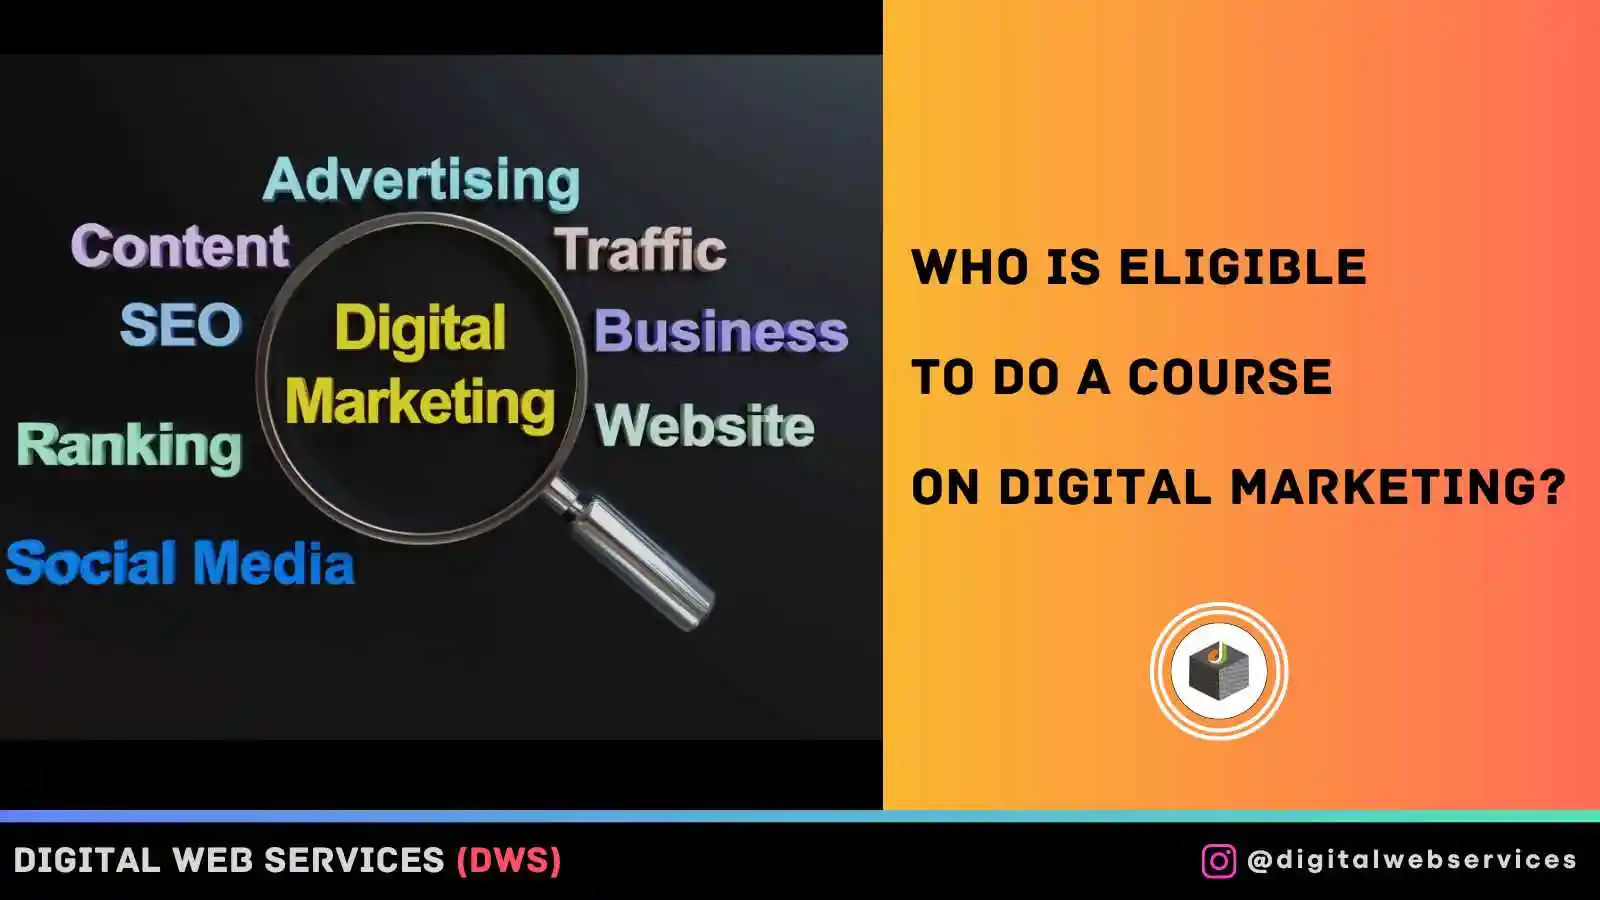 Who is Eligible to do a Course on Digital Marketing_